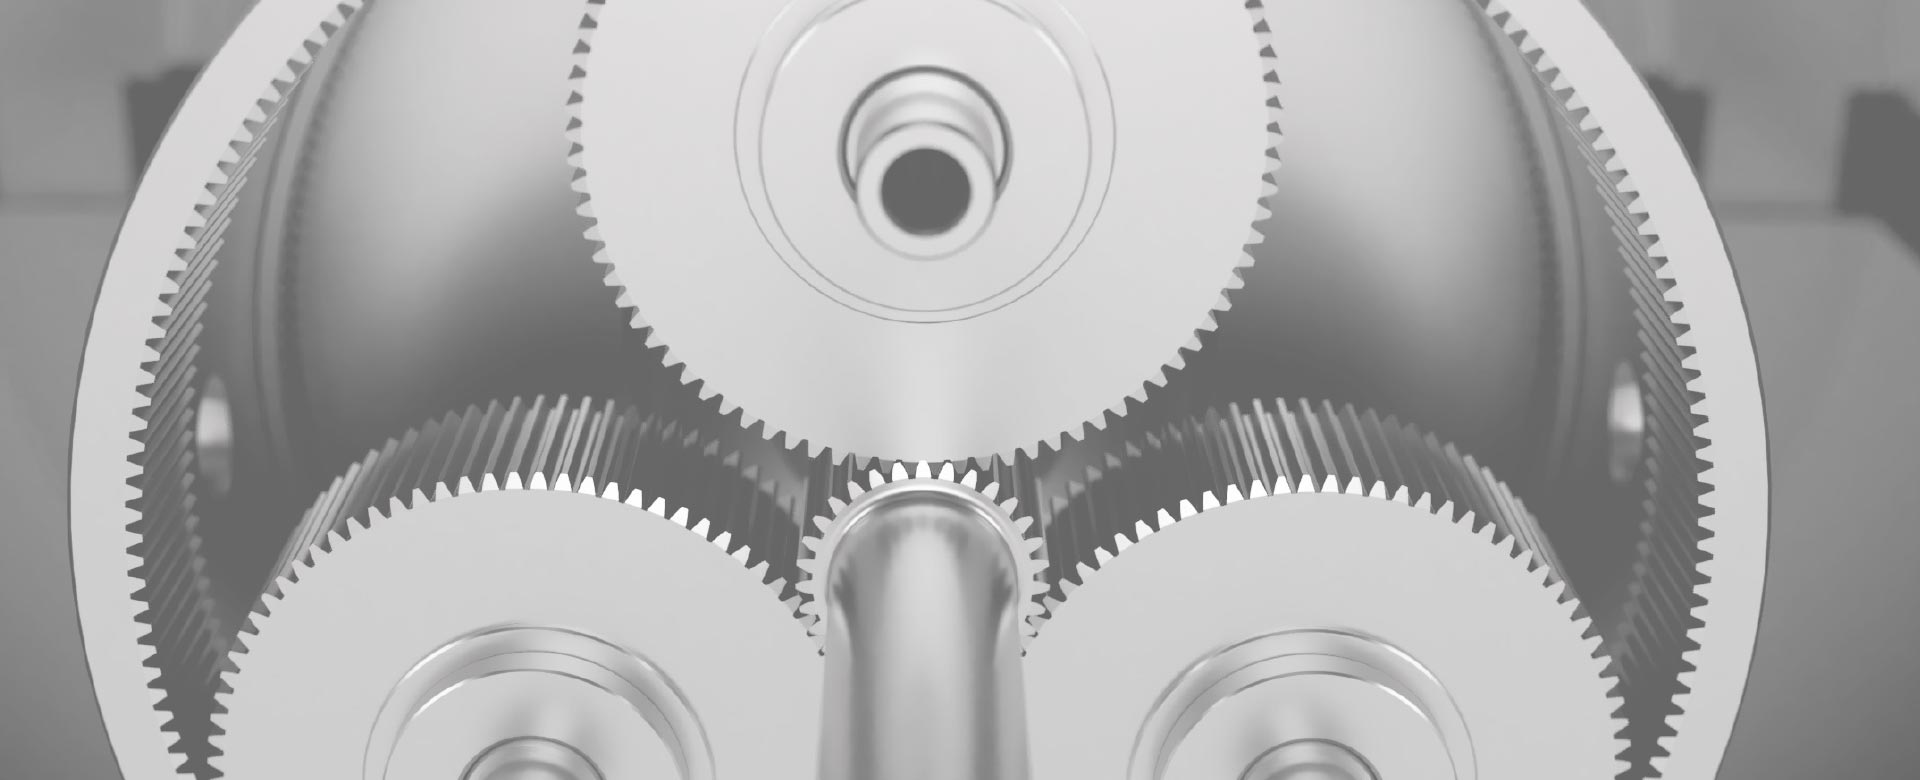 detailed view of epicyclic gears